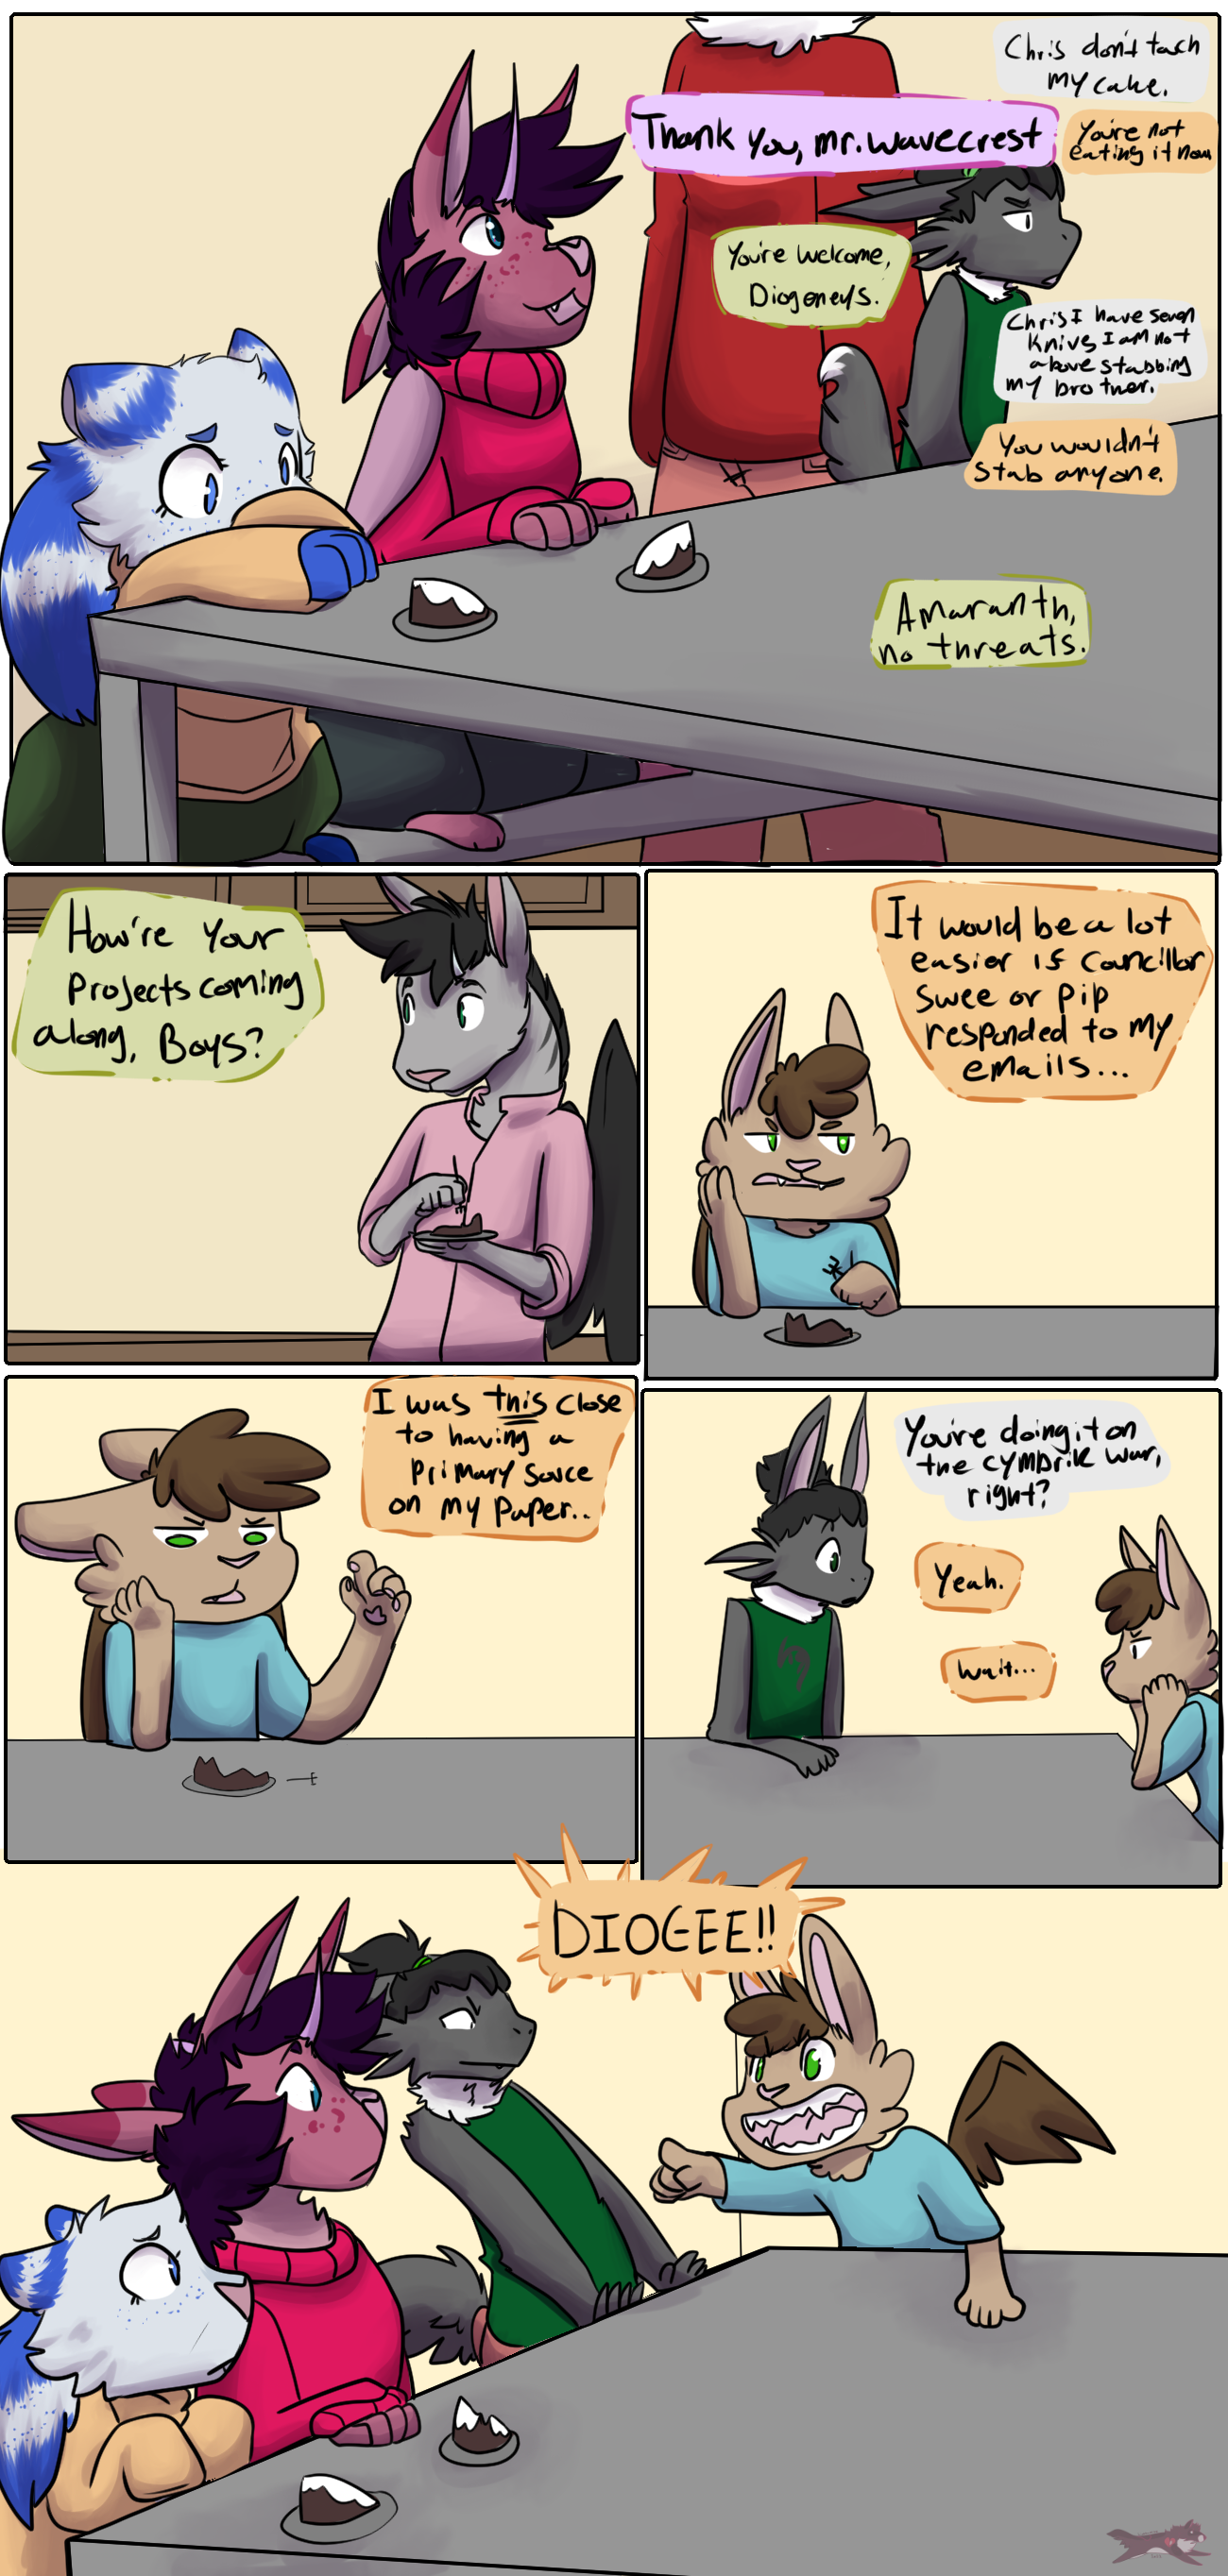 page 89 - This close